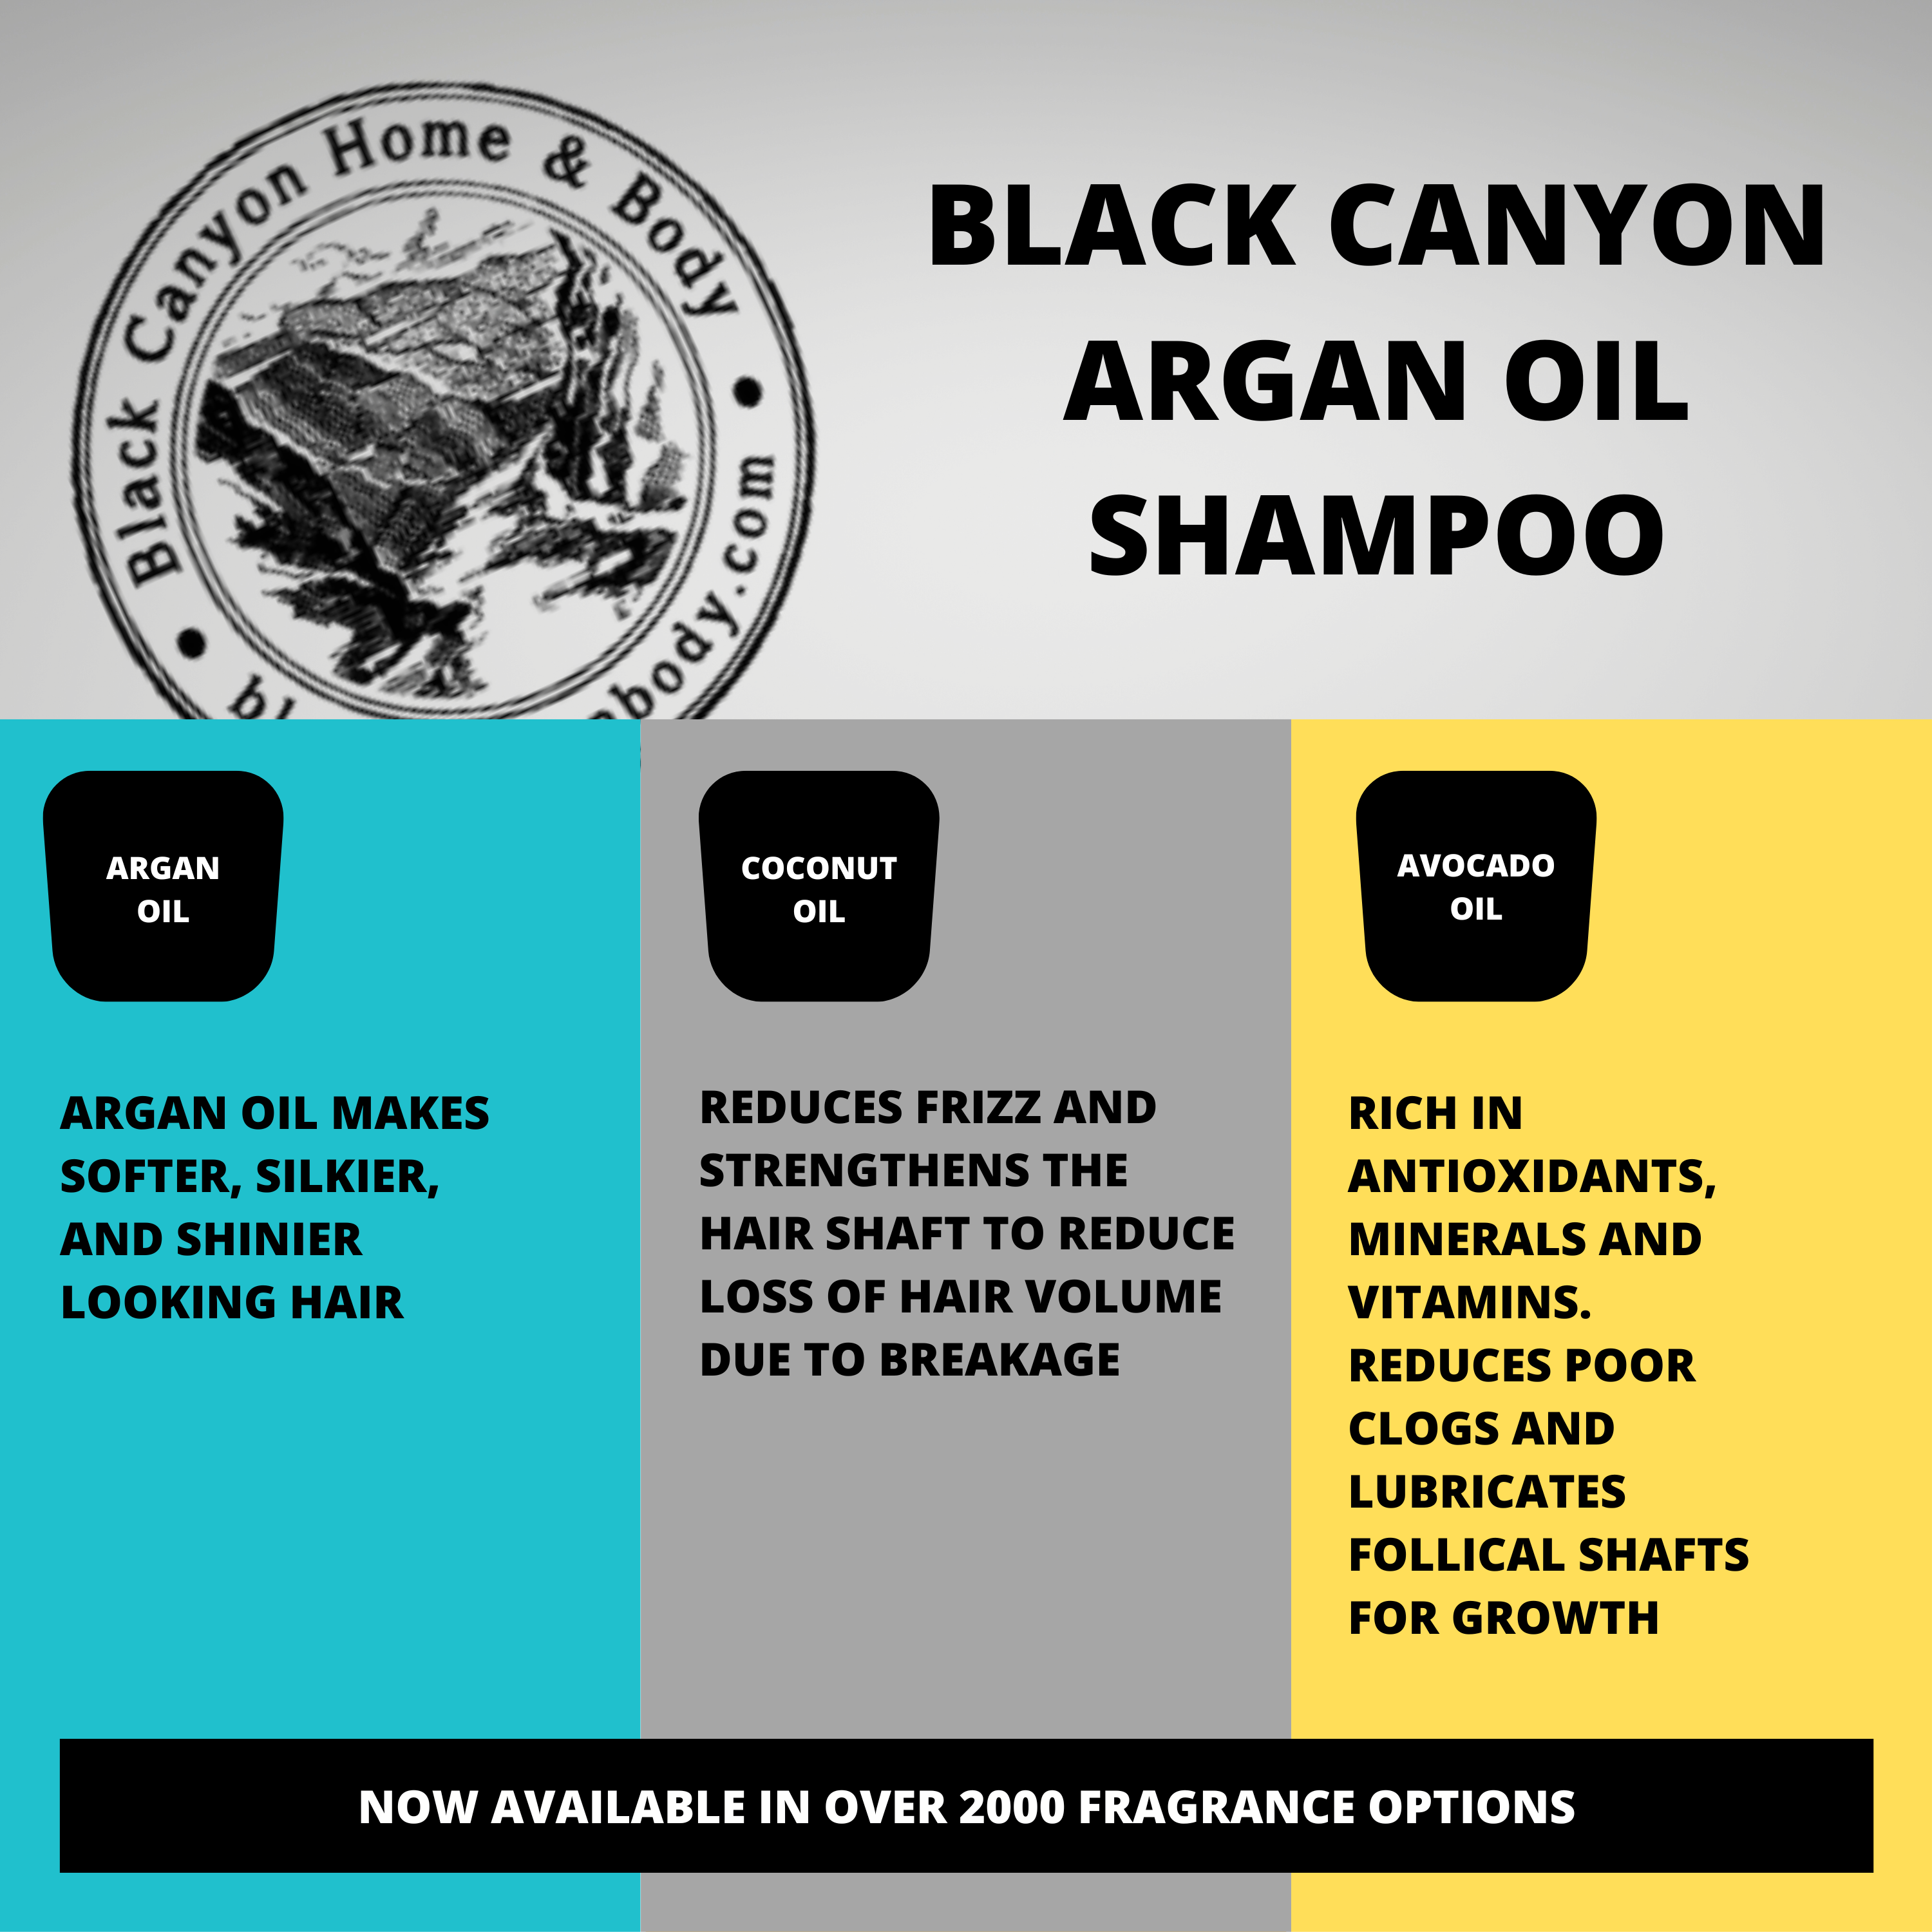 Black Canyon East Asian Spice Scented Shampoo with Argan Oil